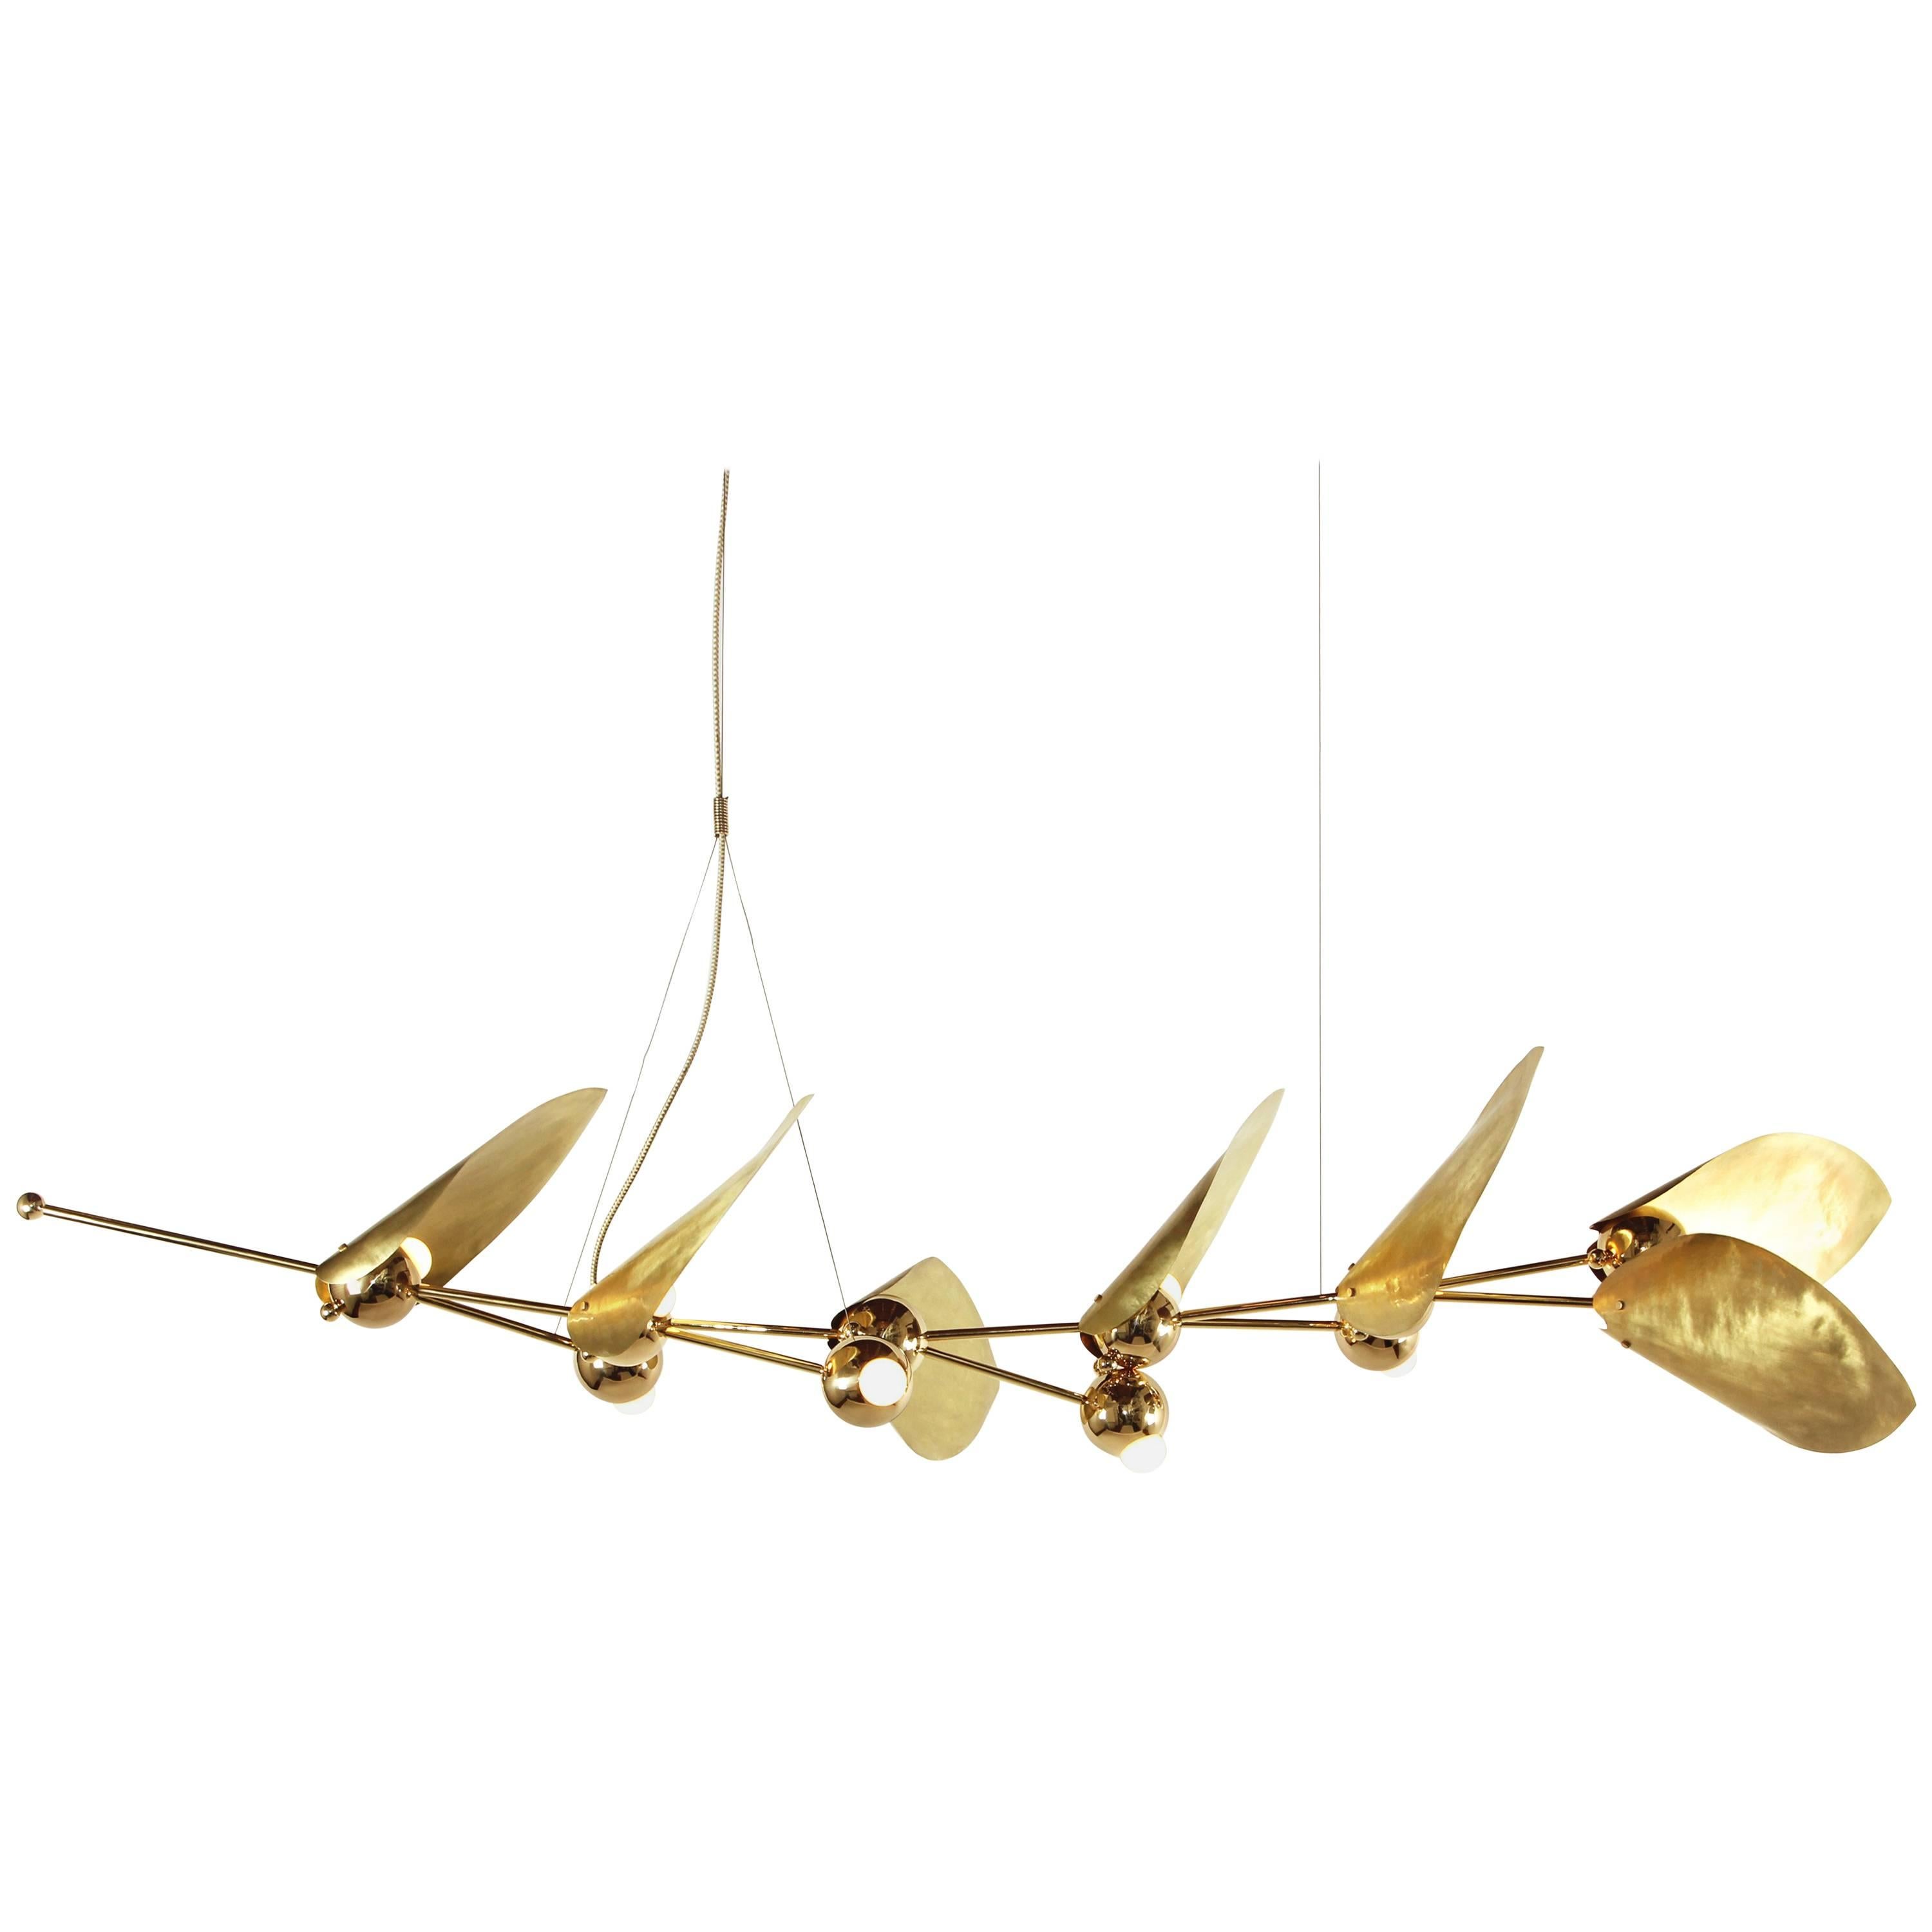 Inspired by laurel wreaths from ancient Rome, this chandelier is comprised of hand-hammered brass leaves surrounding integrated LED bulbs. The design features a natural spiral twist, creating greater movement and form.

Each piece is made to order.